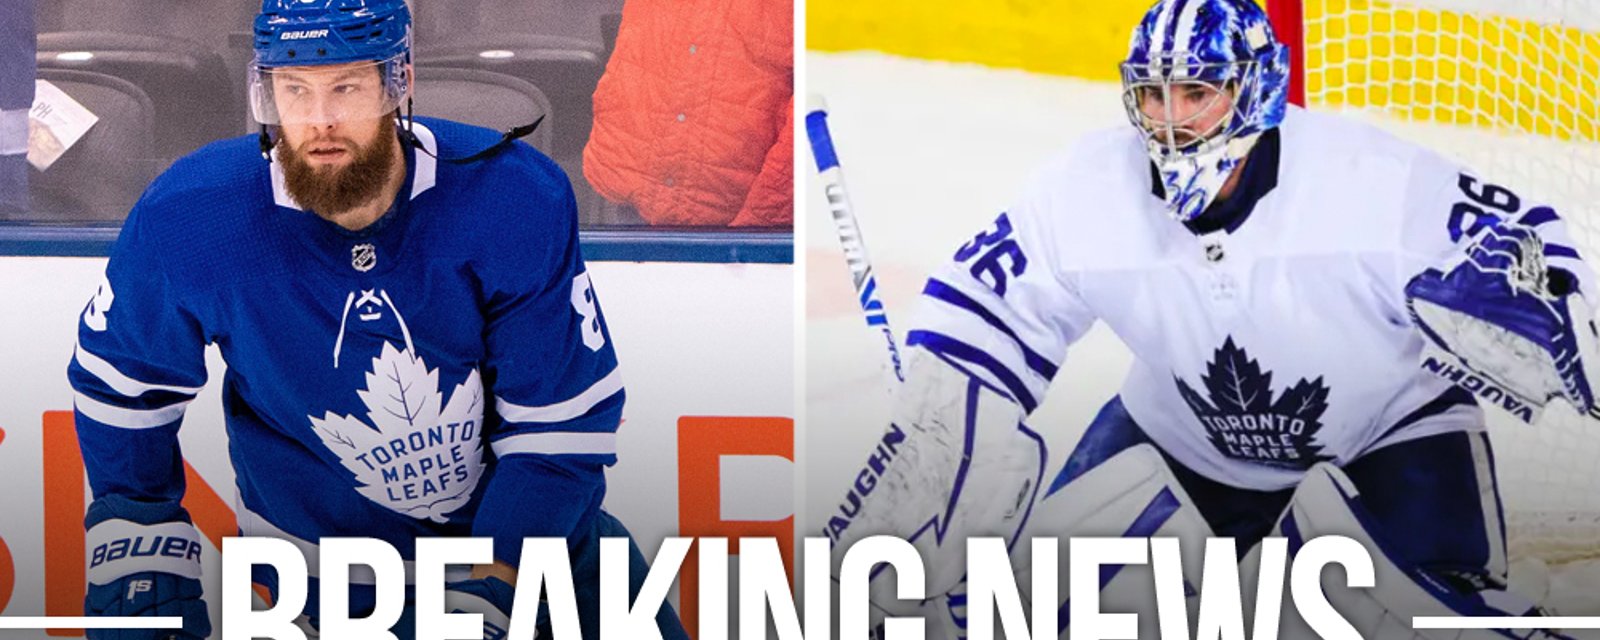 With playoffs clinched, Leafs scratch a number of veterans for tonight's game against Canucks